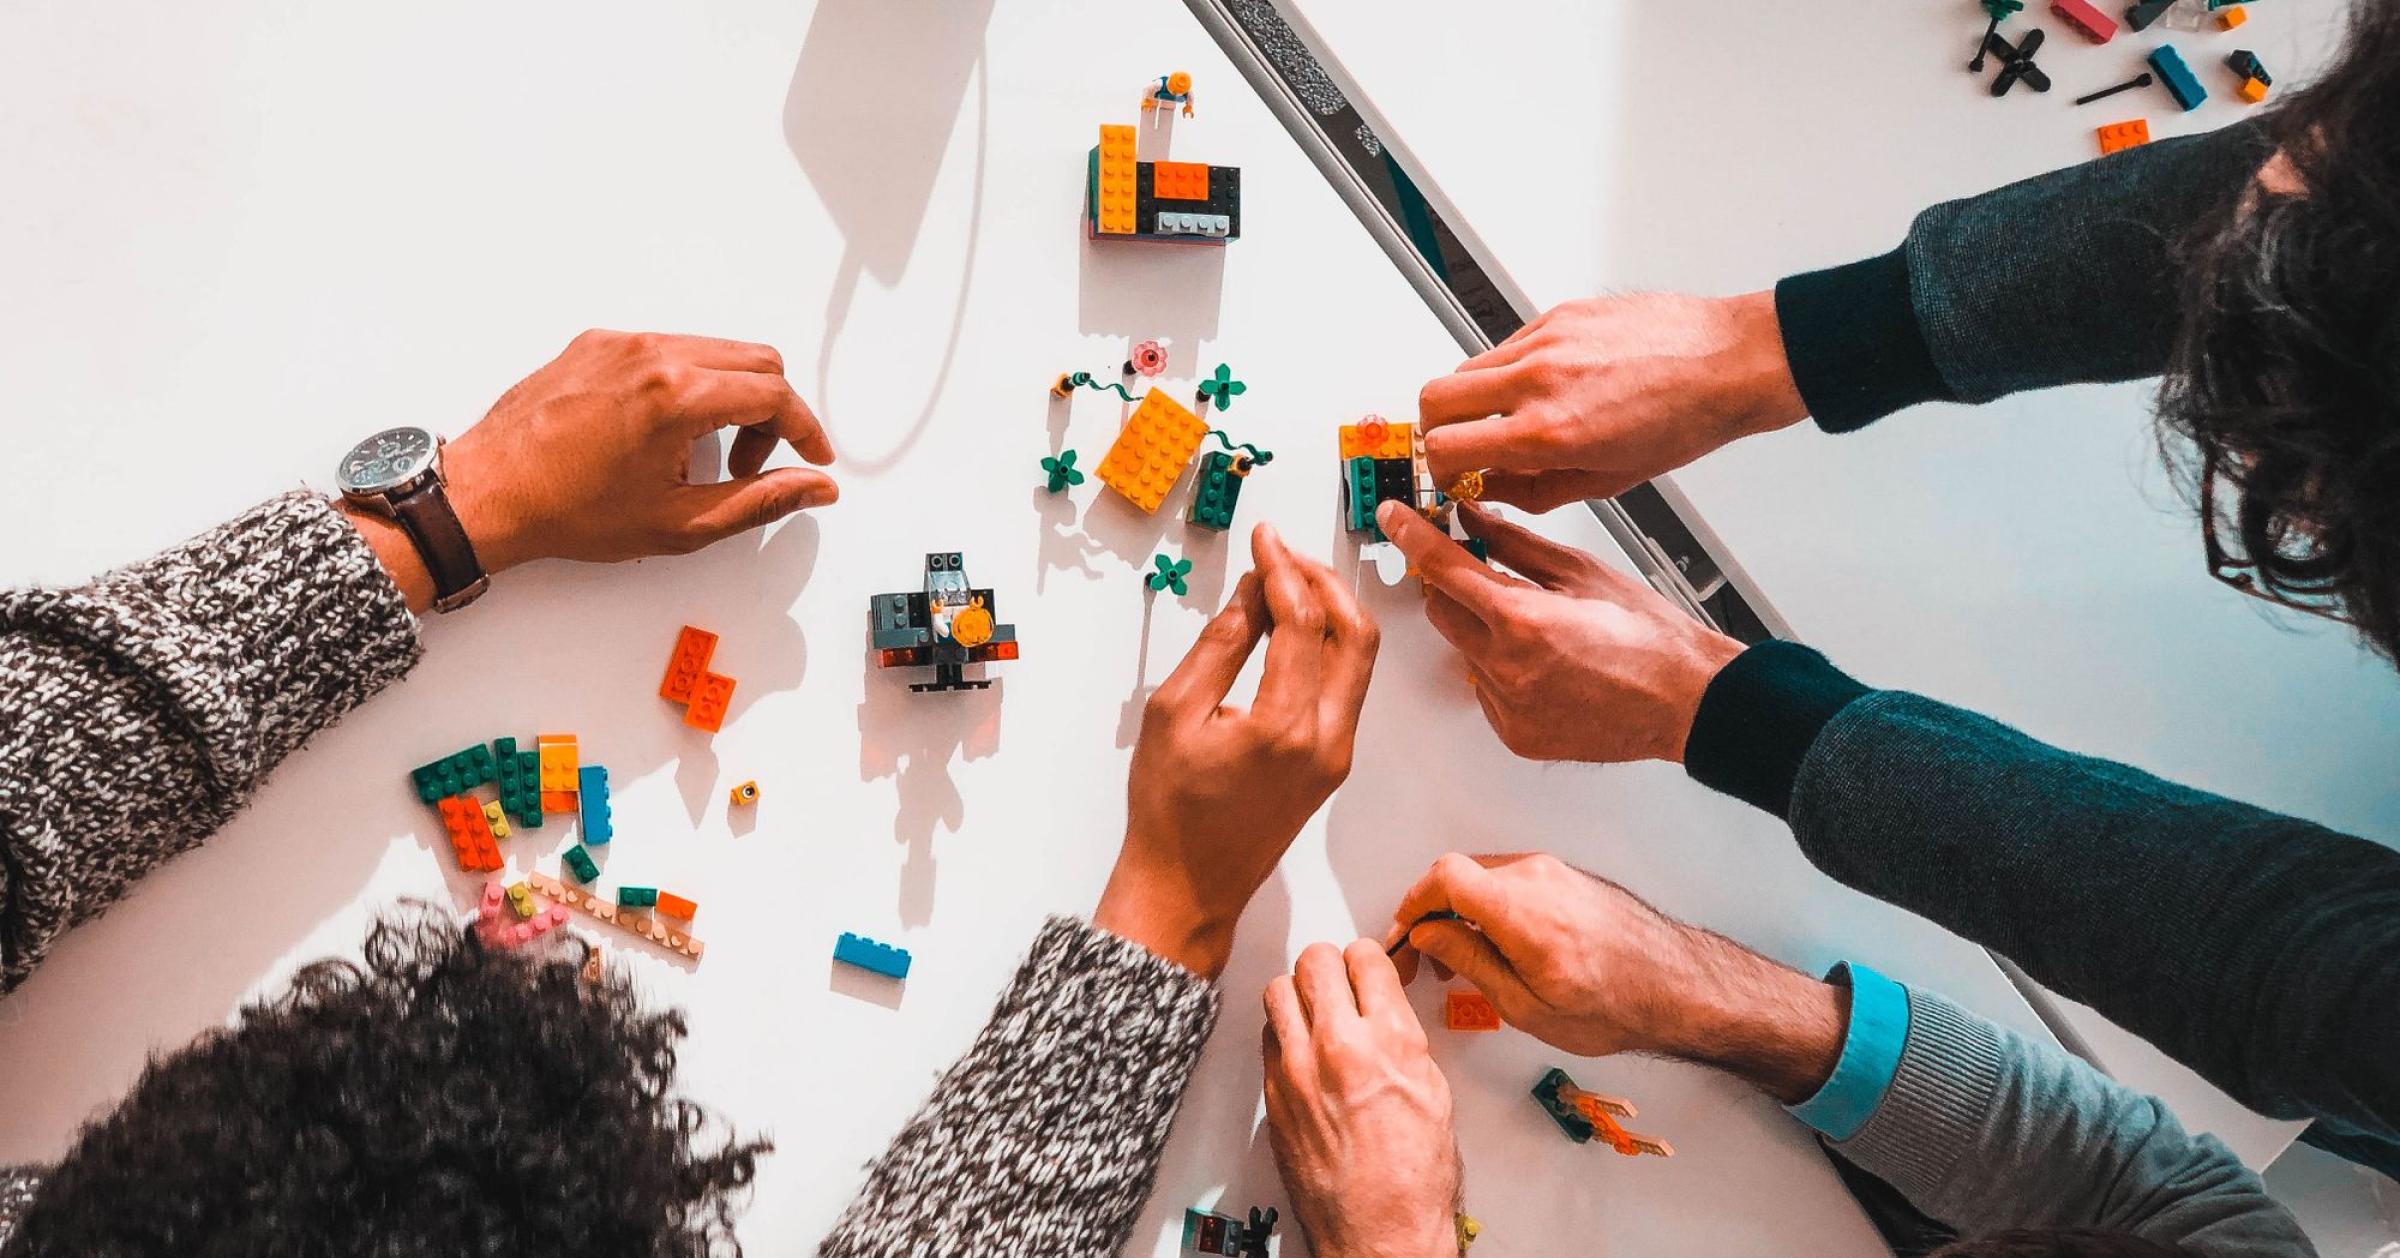 Top down photo of three people's hands working together to build things out of legos on a white table.